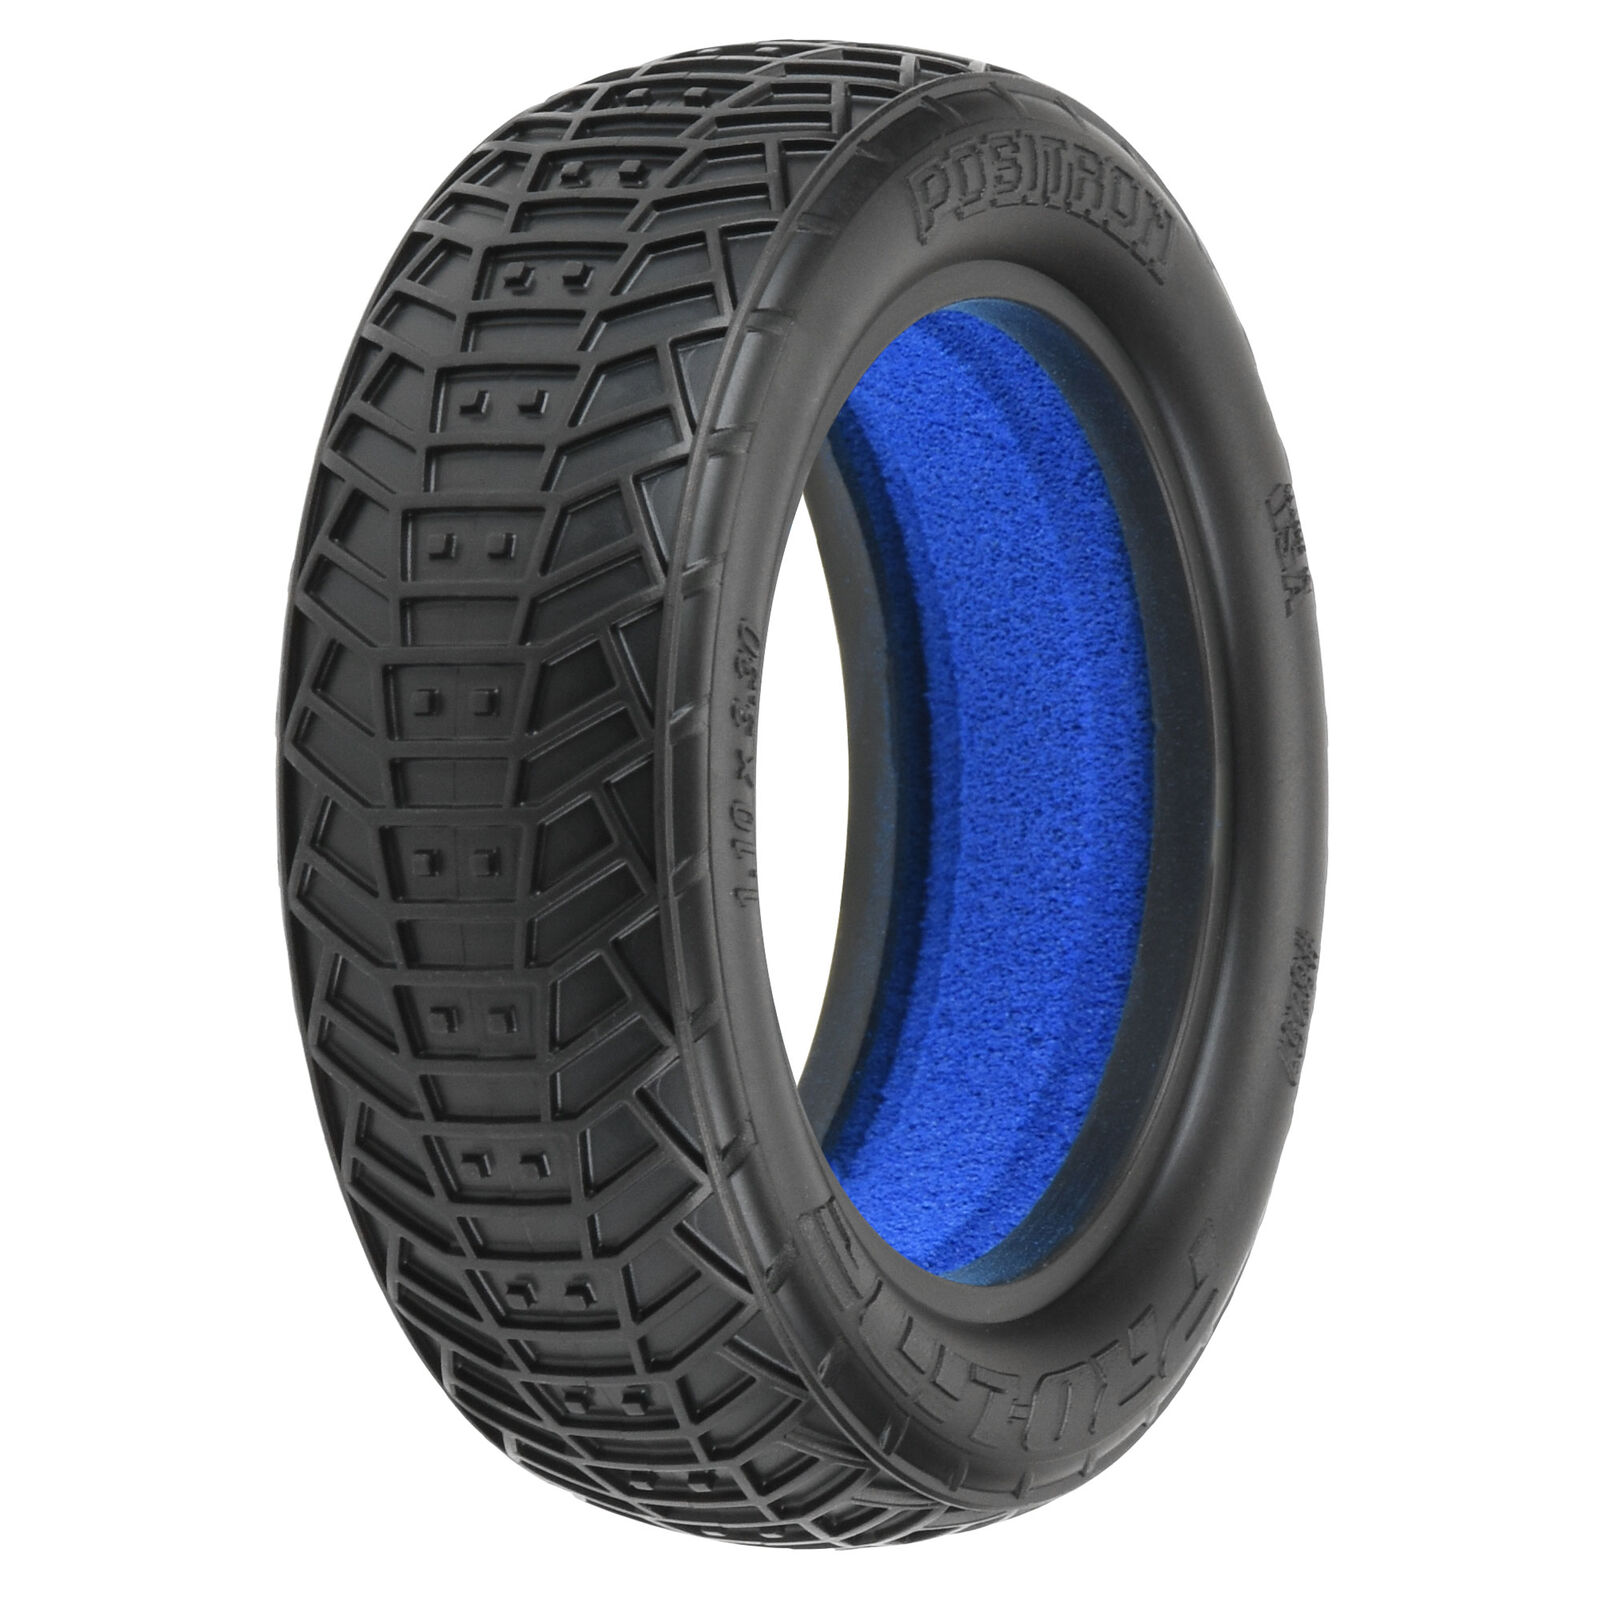 1/10 Front Positron 2.2 2WD M4 Tires with Closed Cell Foam inserts: Off-Road Buggy (2)